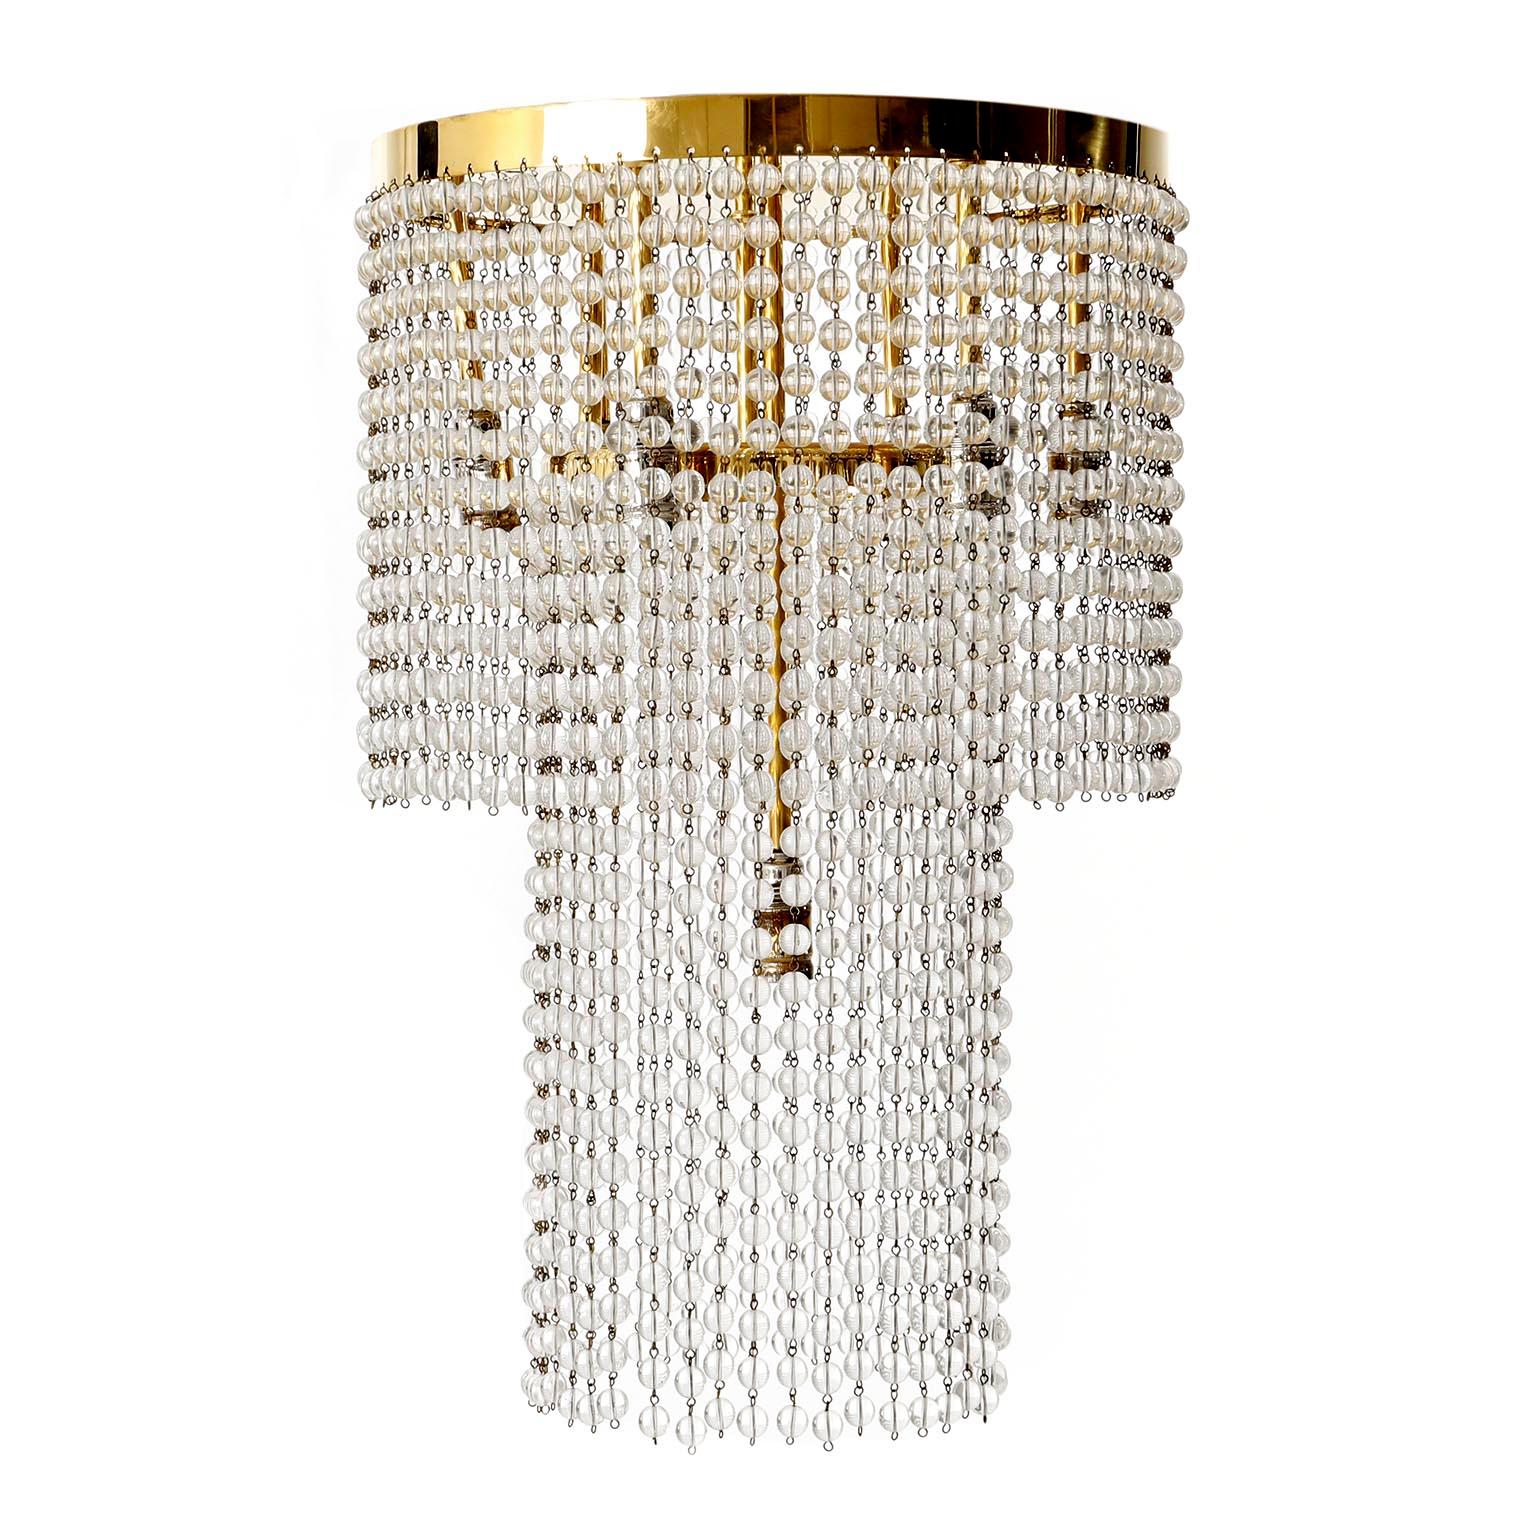 A flush mount chandelier which was used by Josef Hoffmann in the Hohe Warte buildings Brauner and Hochstaetter in 1905-1907 as well as in the Salon Beer-Hofmann in 1905/06.
The light is made of brass and two tiers of crystal glass chains. Hundreds